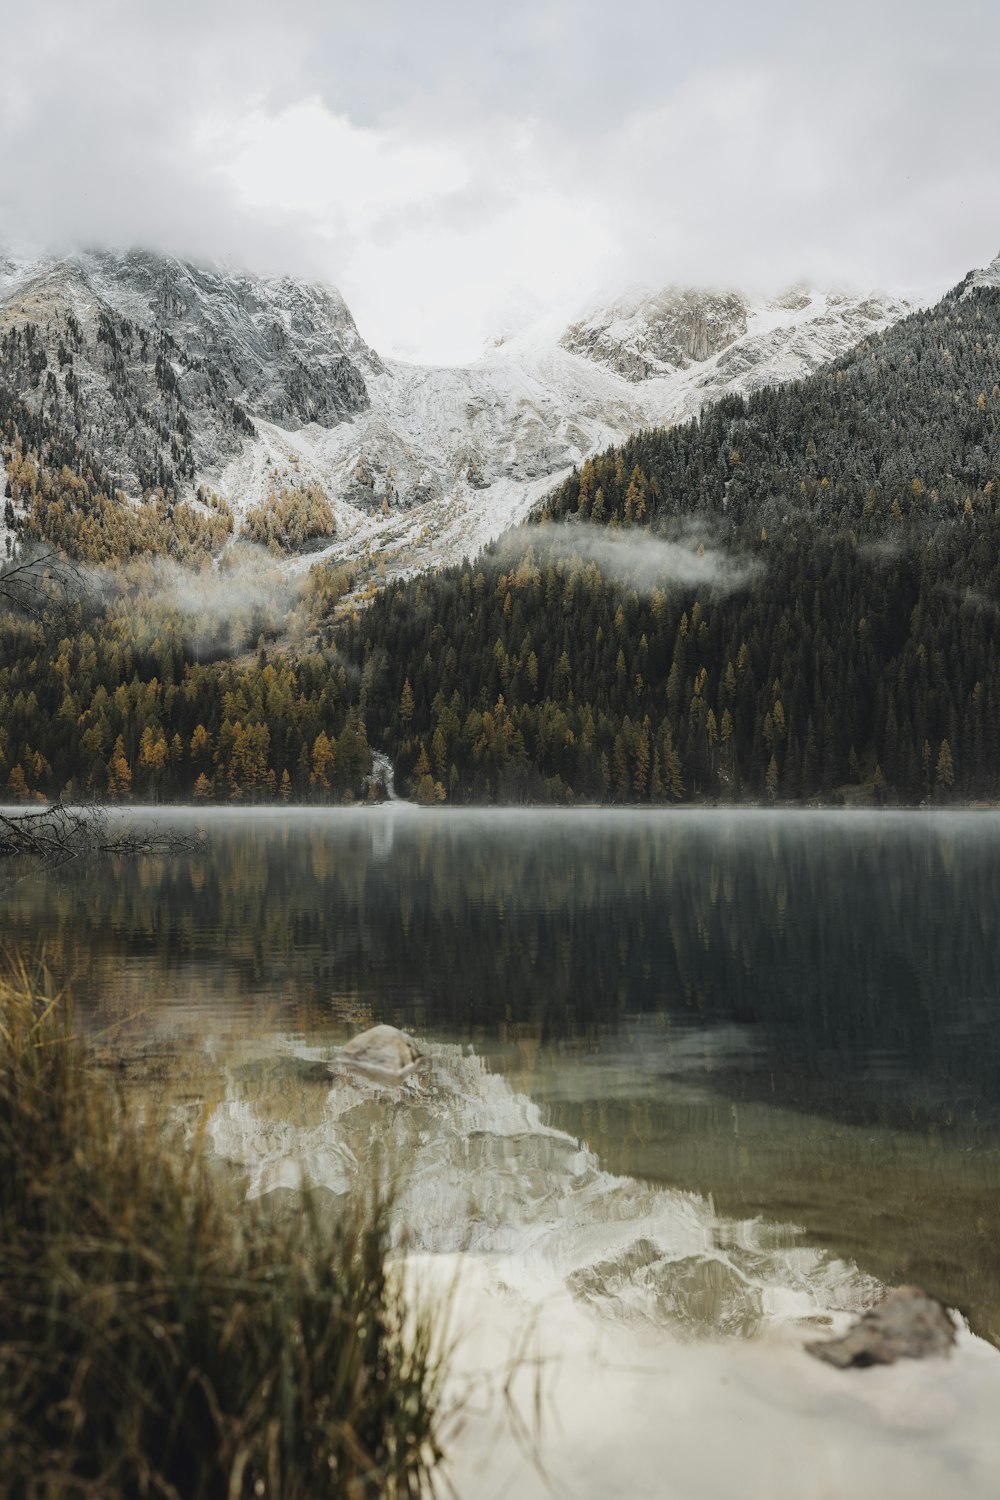 a body of water surrounded by mountains and trees